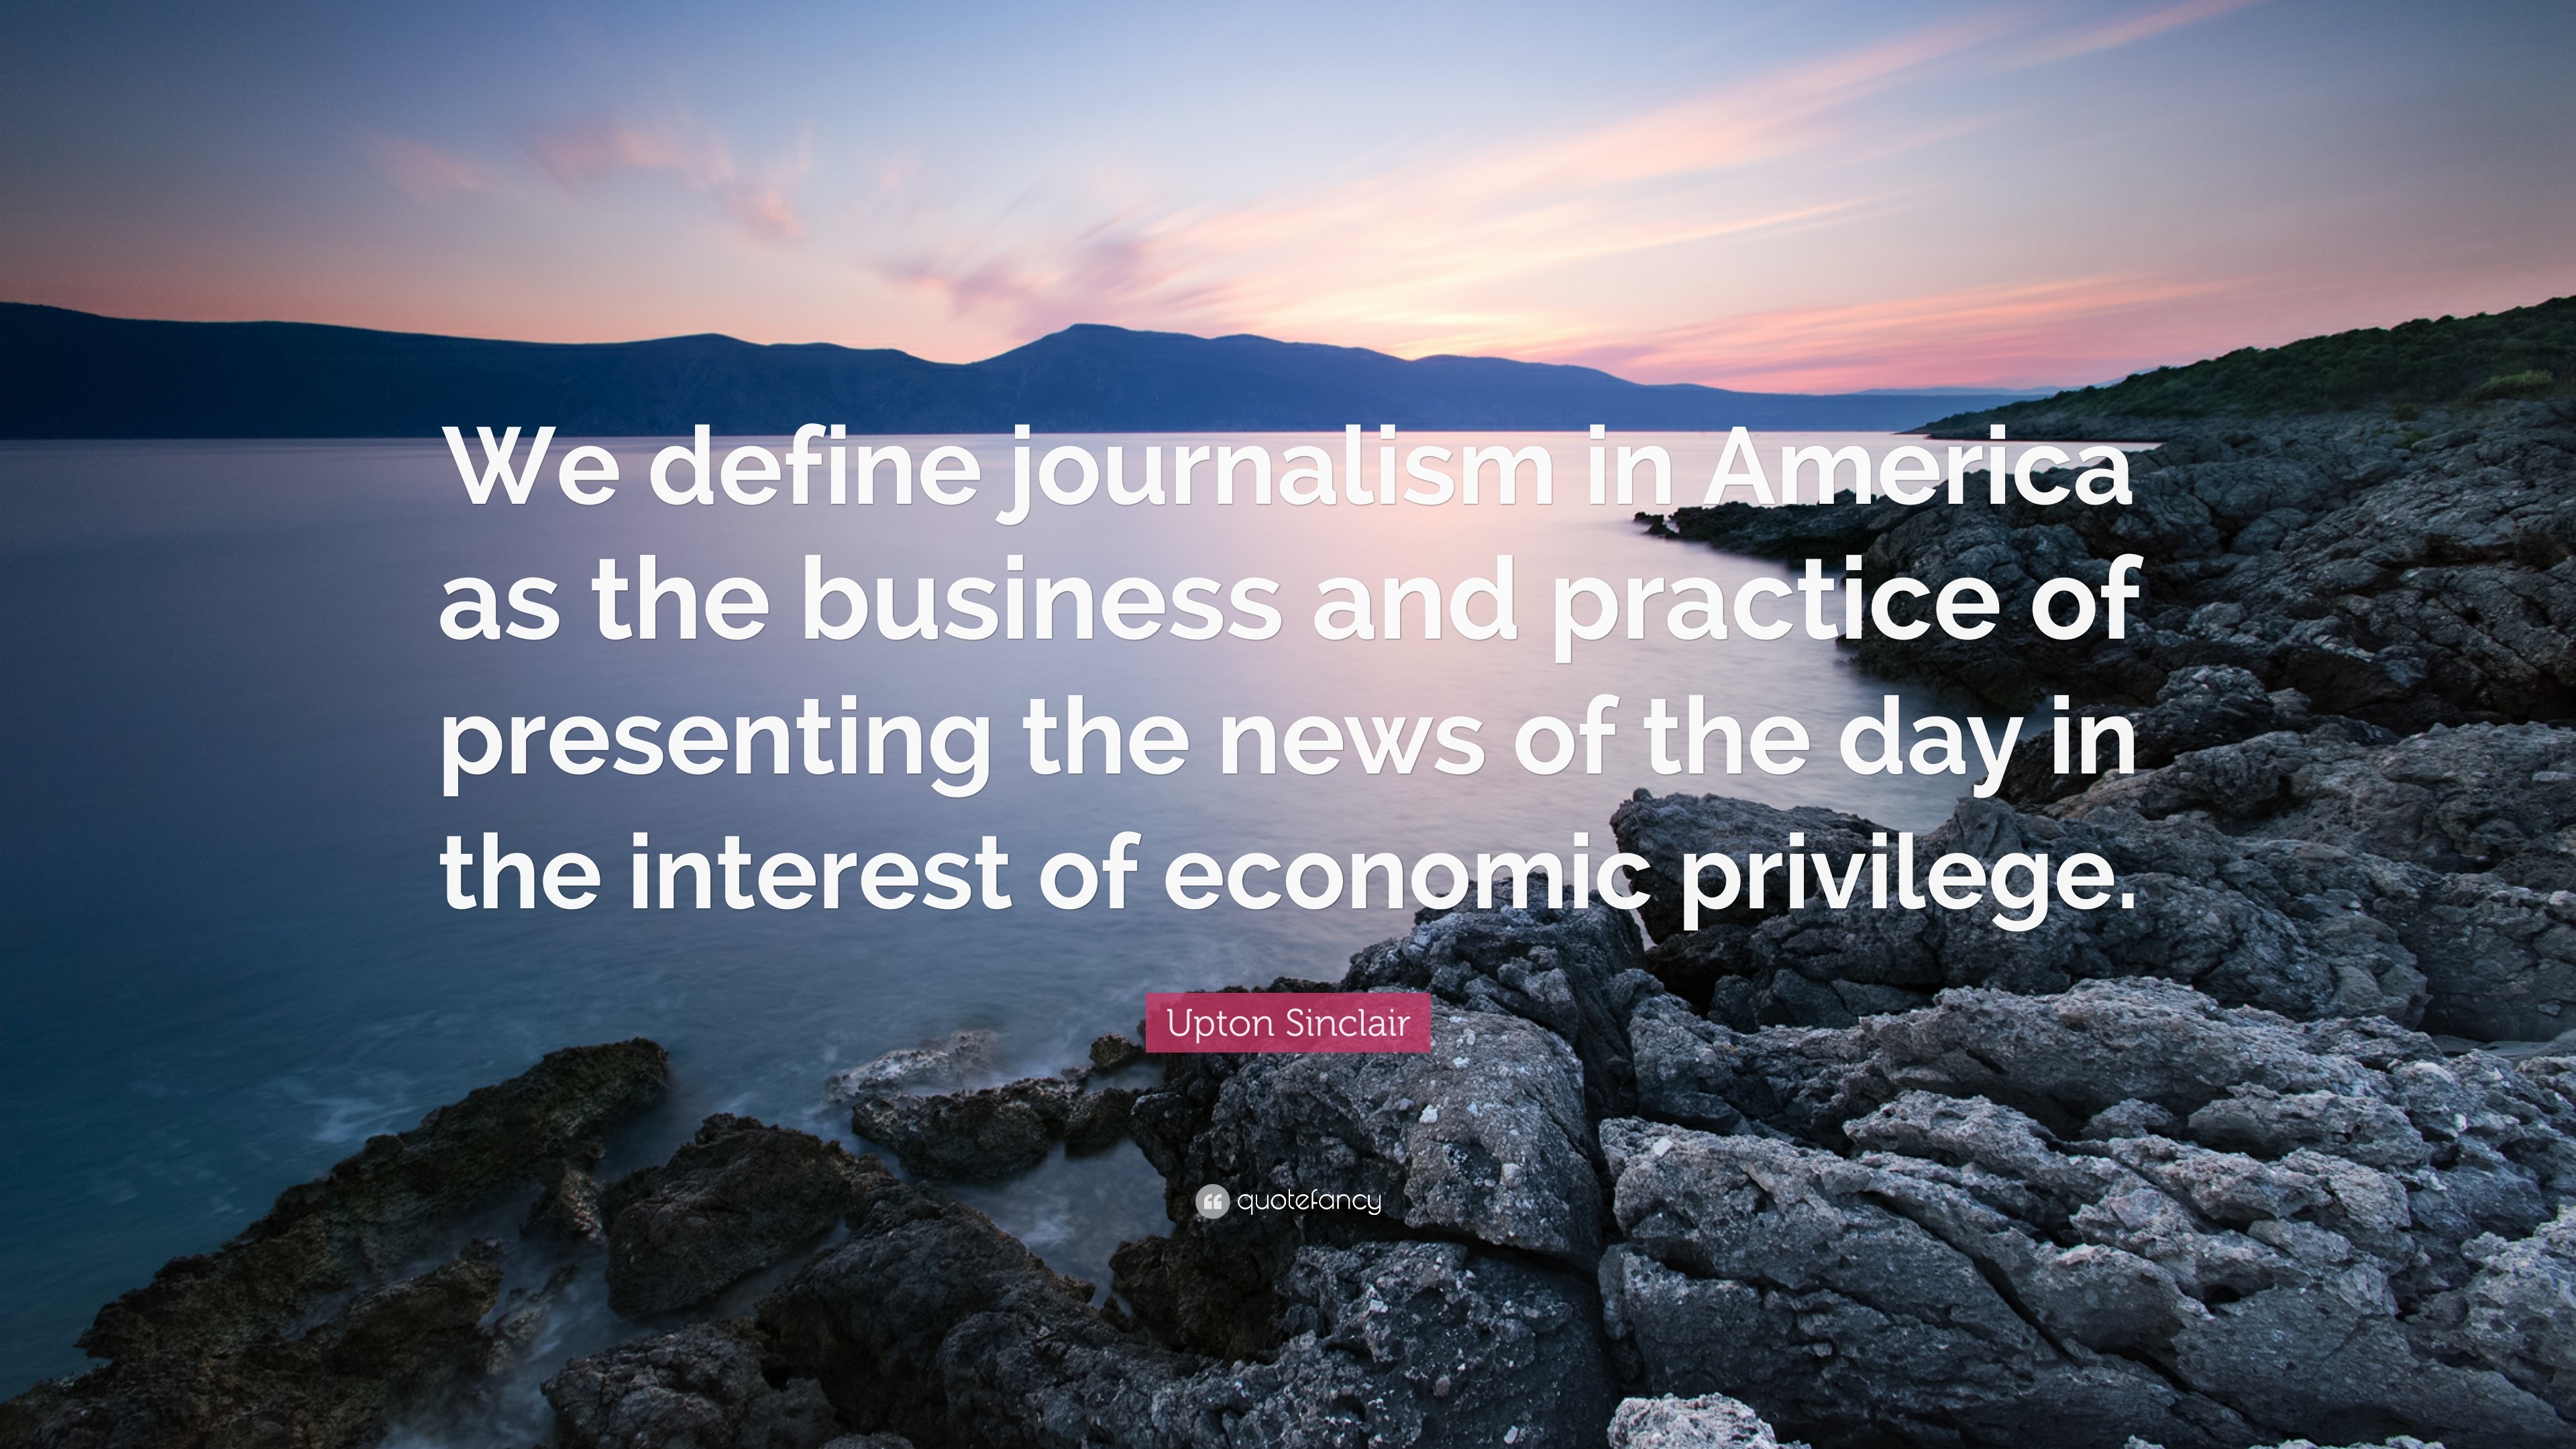 Upton Sinclair Quote “We define journalism in America as the business